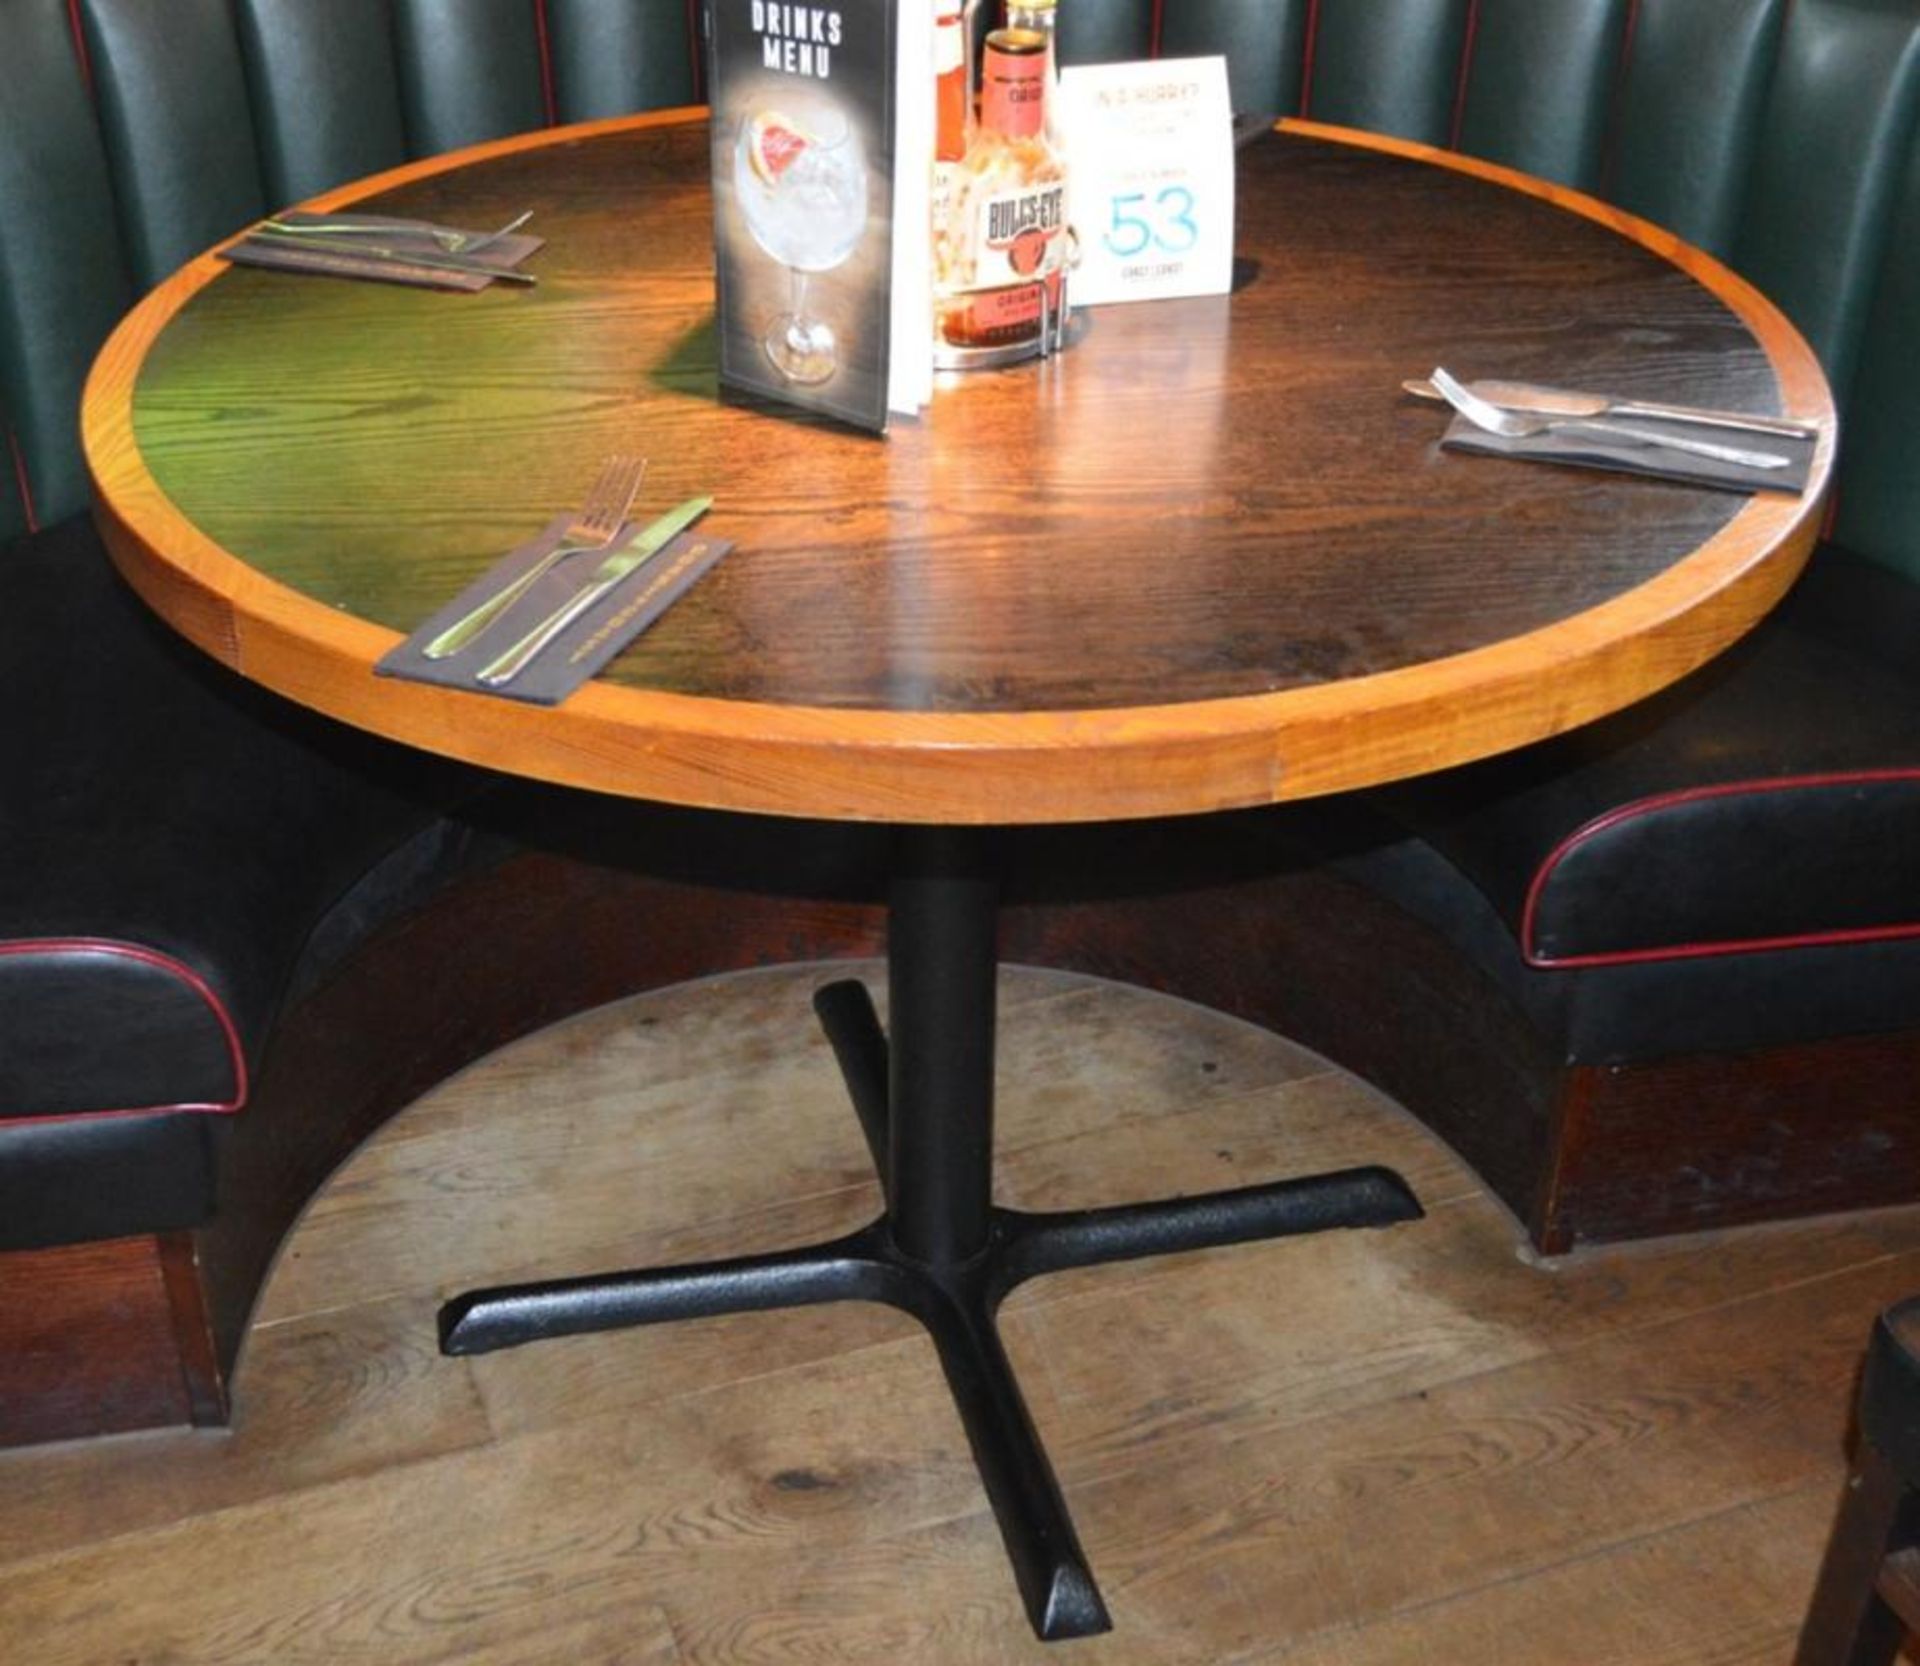 4 x Restaurant Dining Tables With Cast Iron Bases - Two Tone Wooden Finish With Shaped Edges - H76 x